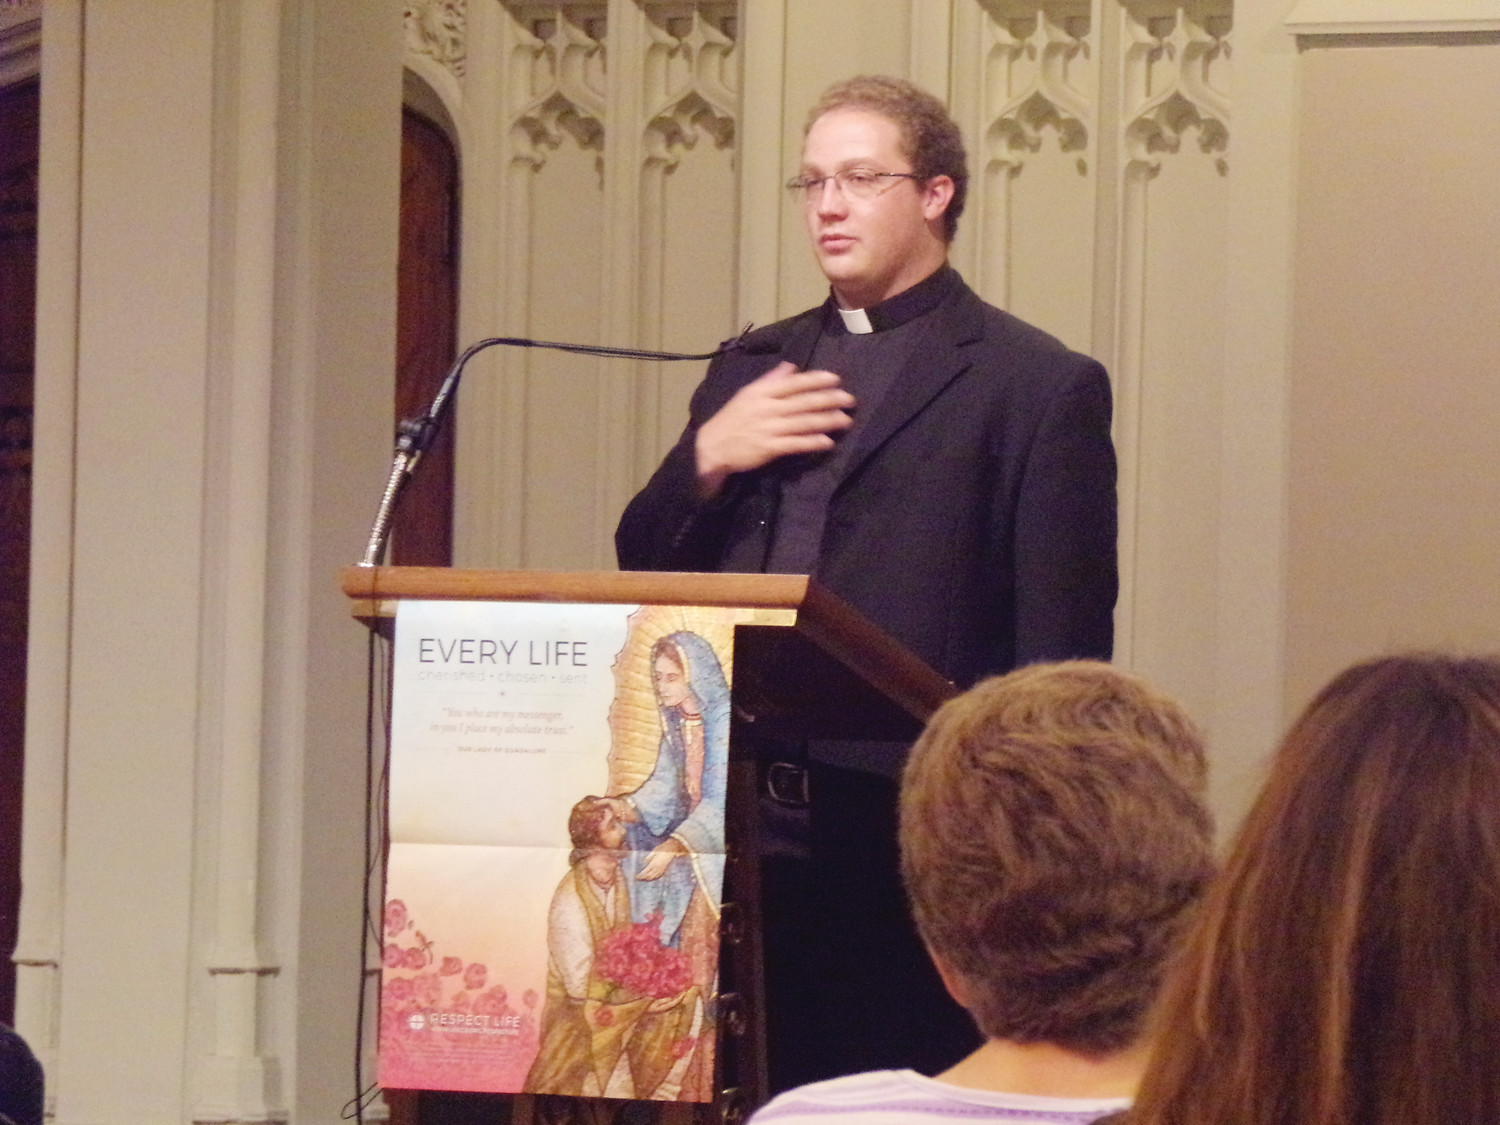 Following Mass, there was a reception with Bishop Thomas J. Tobin in the cathedral hall with many presentations, including a talk by Father Nicholas Fleming, Human Life Guild chaplain, entitled, “The Modern Debate – Understanding Transgenderism from a Catholic Perspective.”